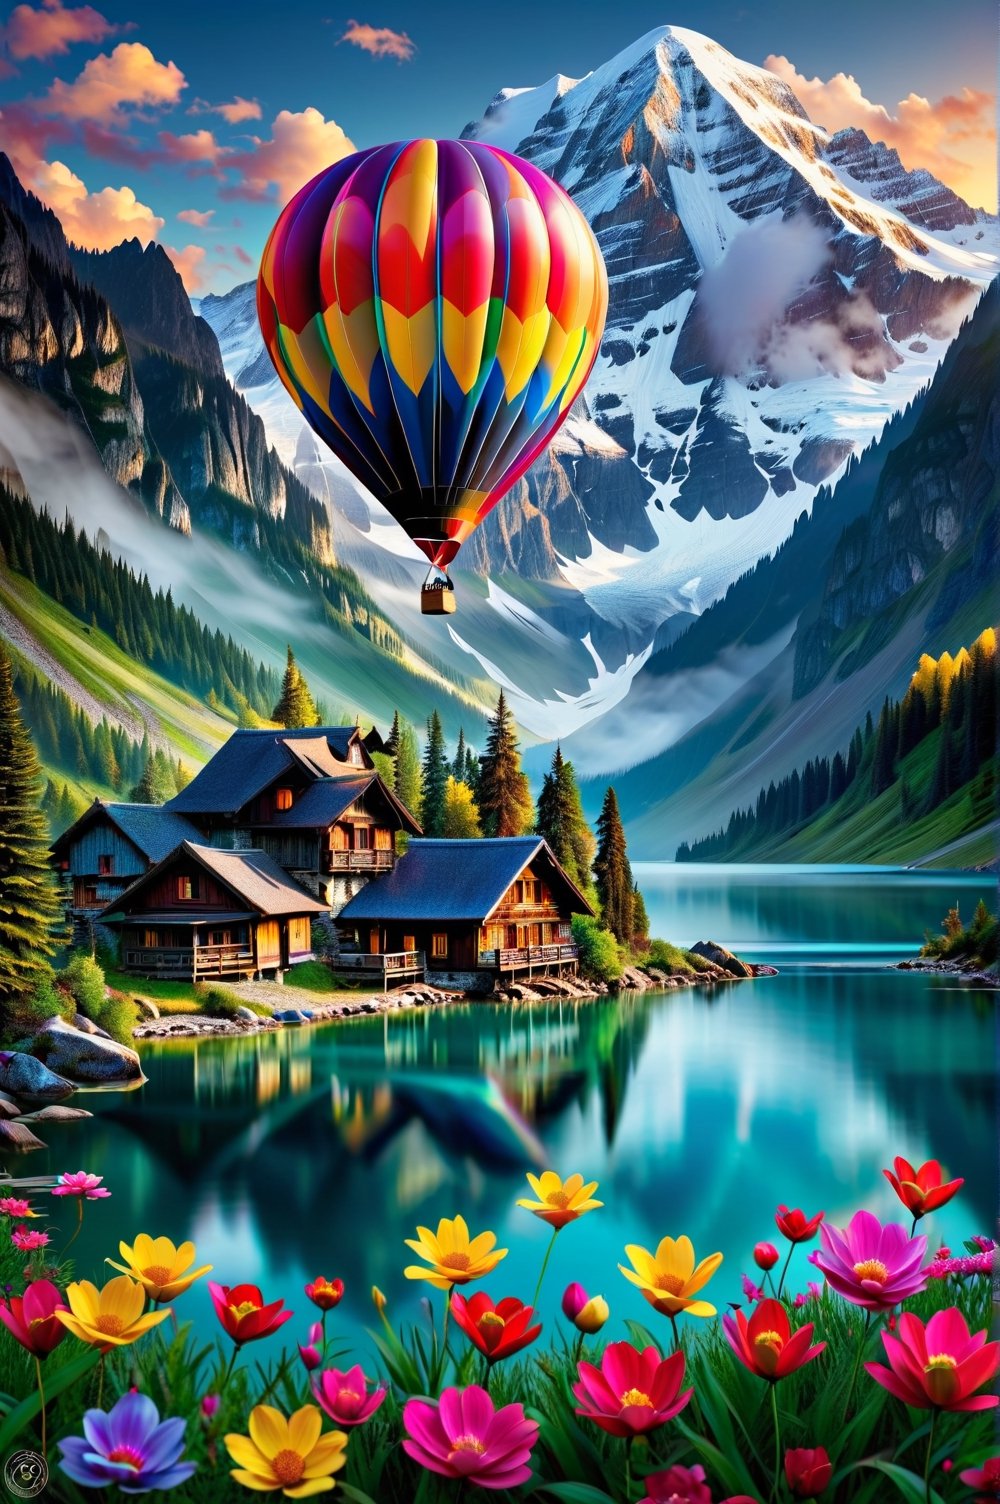 As [summer] approaches, the mind is transported to a stunning setting, a chalet at the foot of the mountain, on the edge of a crystal clear lake that reflects a beautiful giant balloon colored with many seasonal flowers, which looks like something out of a fairy tale. This landscape is so magnificent that it transcends words. Textured details in high quality and resolution bring exceptional precision and realism to portray the joy of the season. With meticulous color adjustments and perfect lighting, images capture the mood with low noise and sharp edges, creating harmonious compositions that are truly award-winning works.